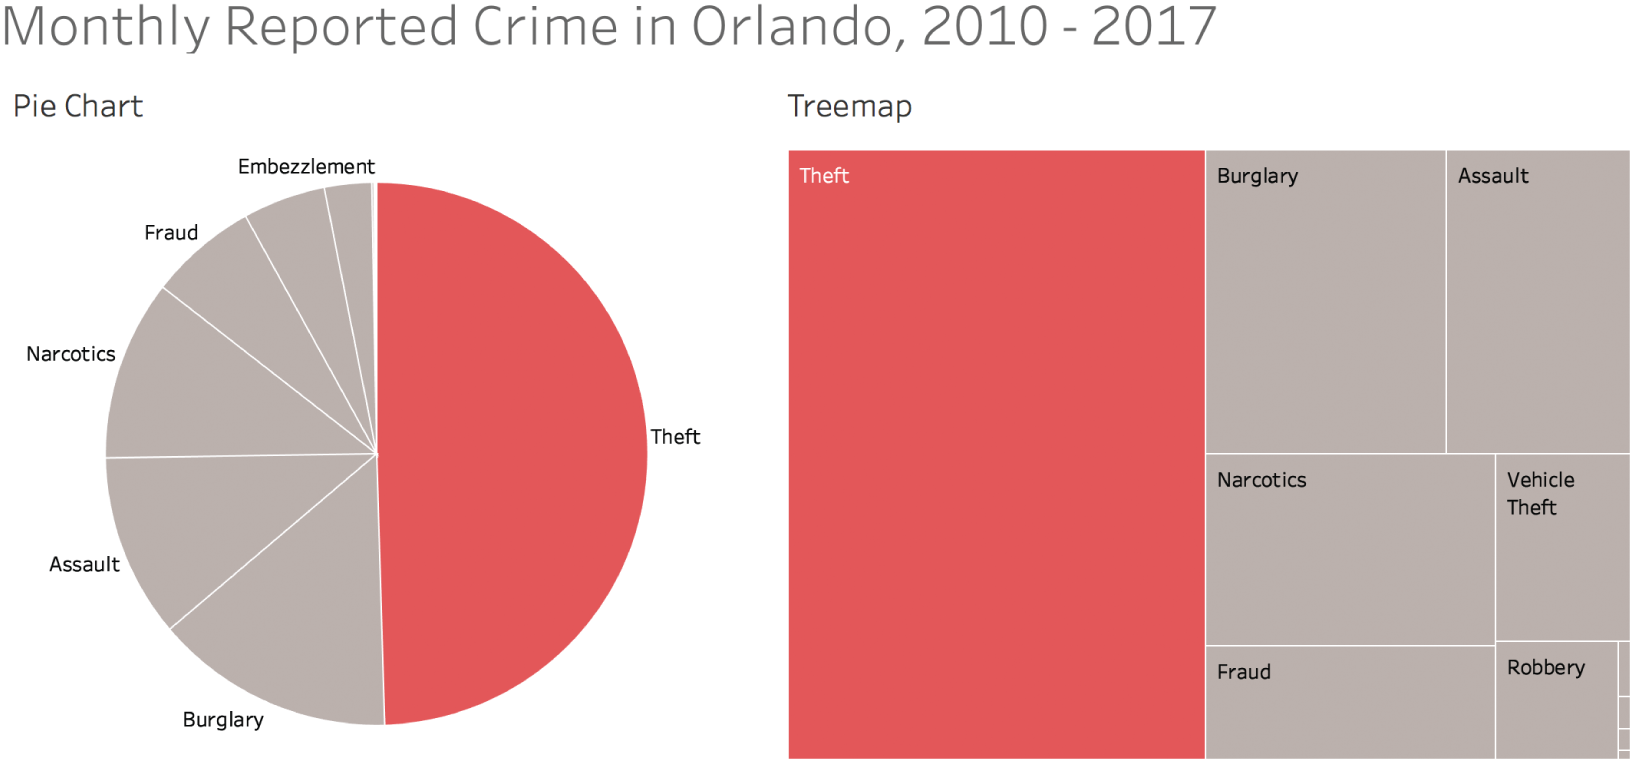 A pie chart and a treemap depicting the monthly reported crime in Orlando, from the year 2010 to 2017.